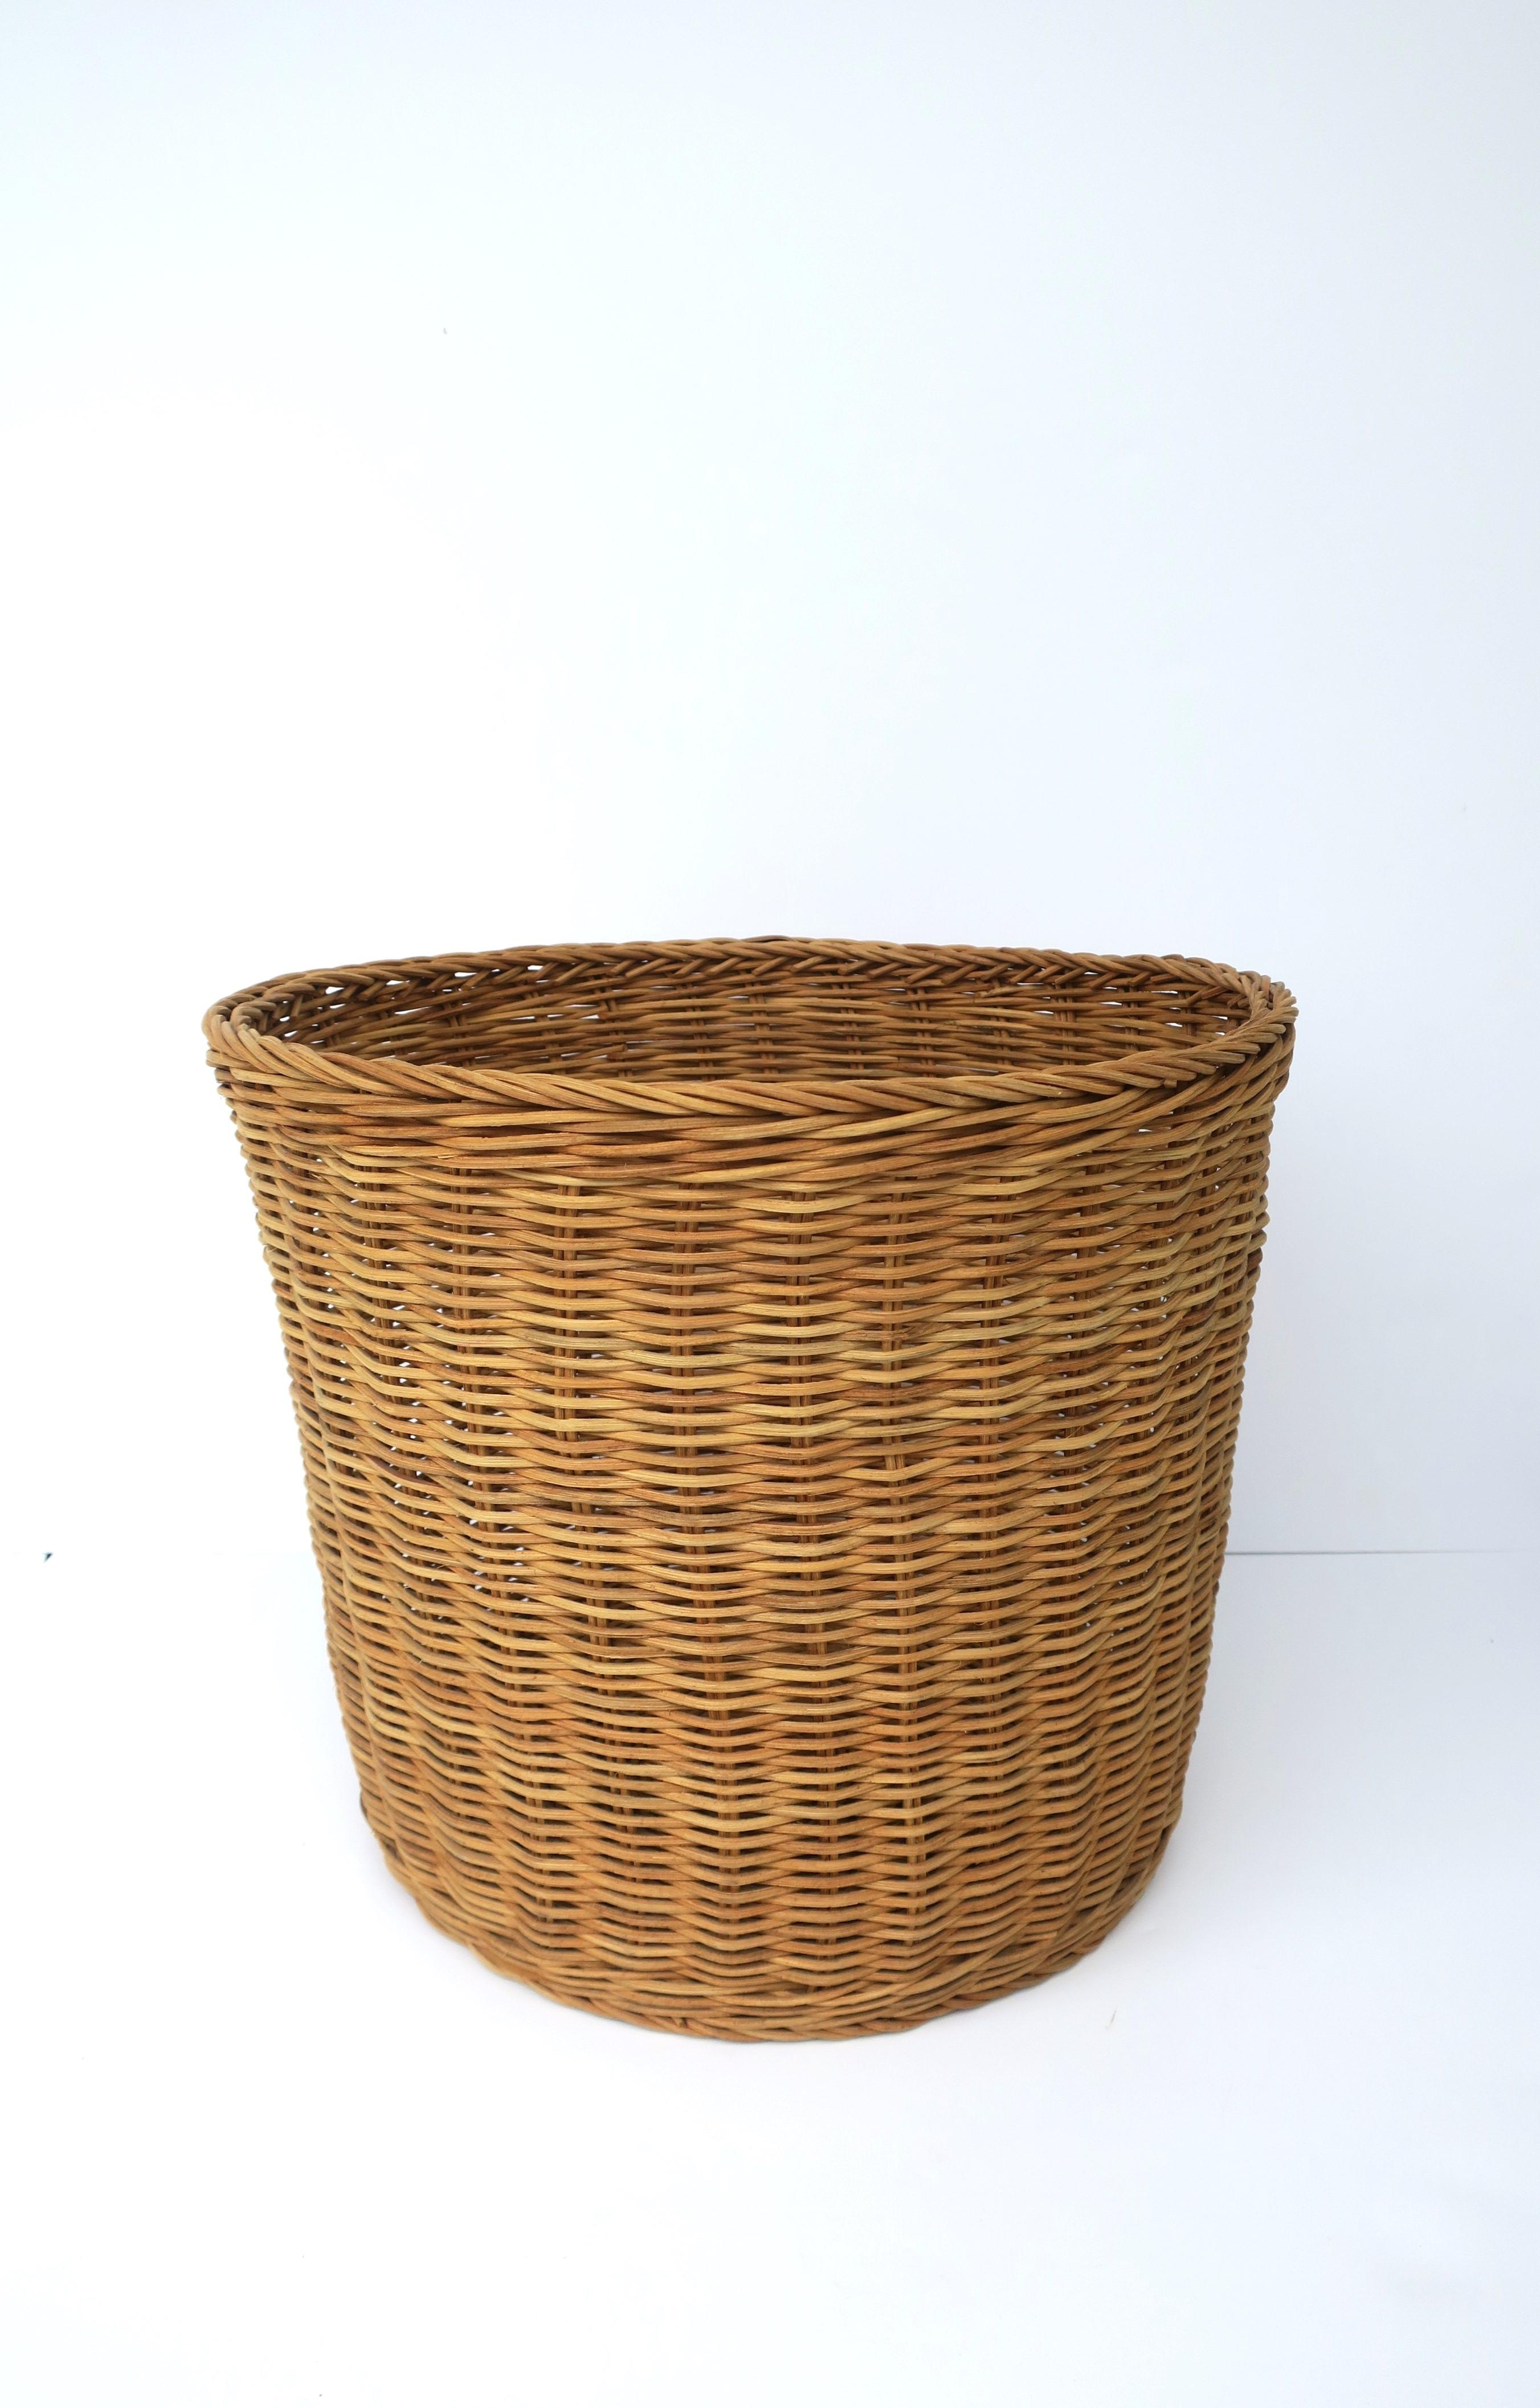 A simple wicker basket, circa late-20th century. Use as a waste basket/trash can or plant potholder cachepot (as demonstrated), etc. 

Dimensions: 15.38